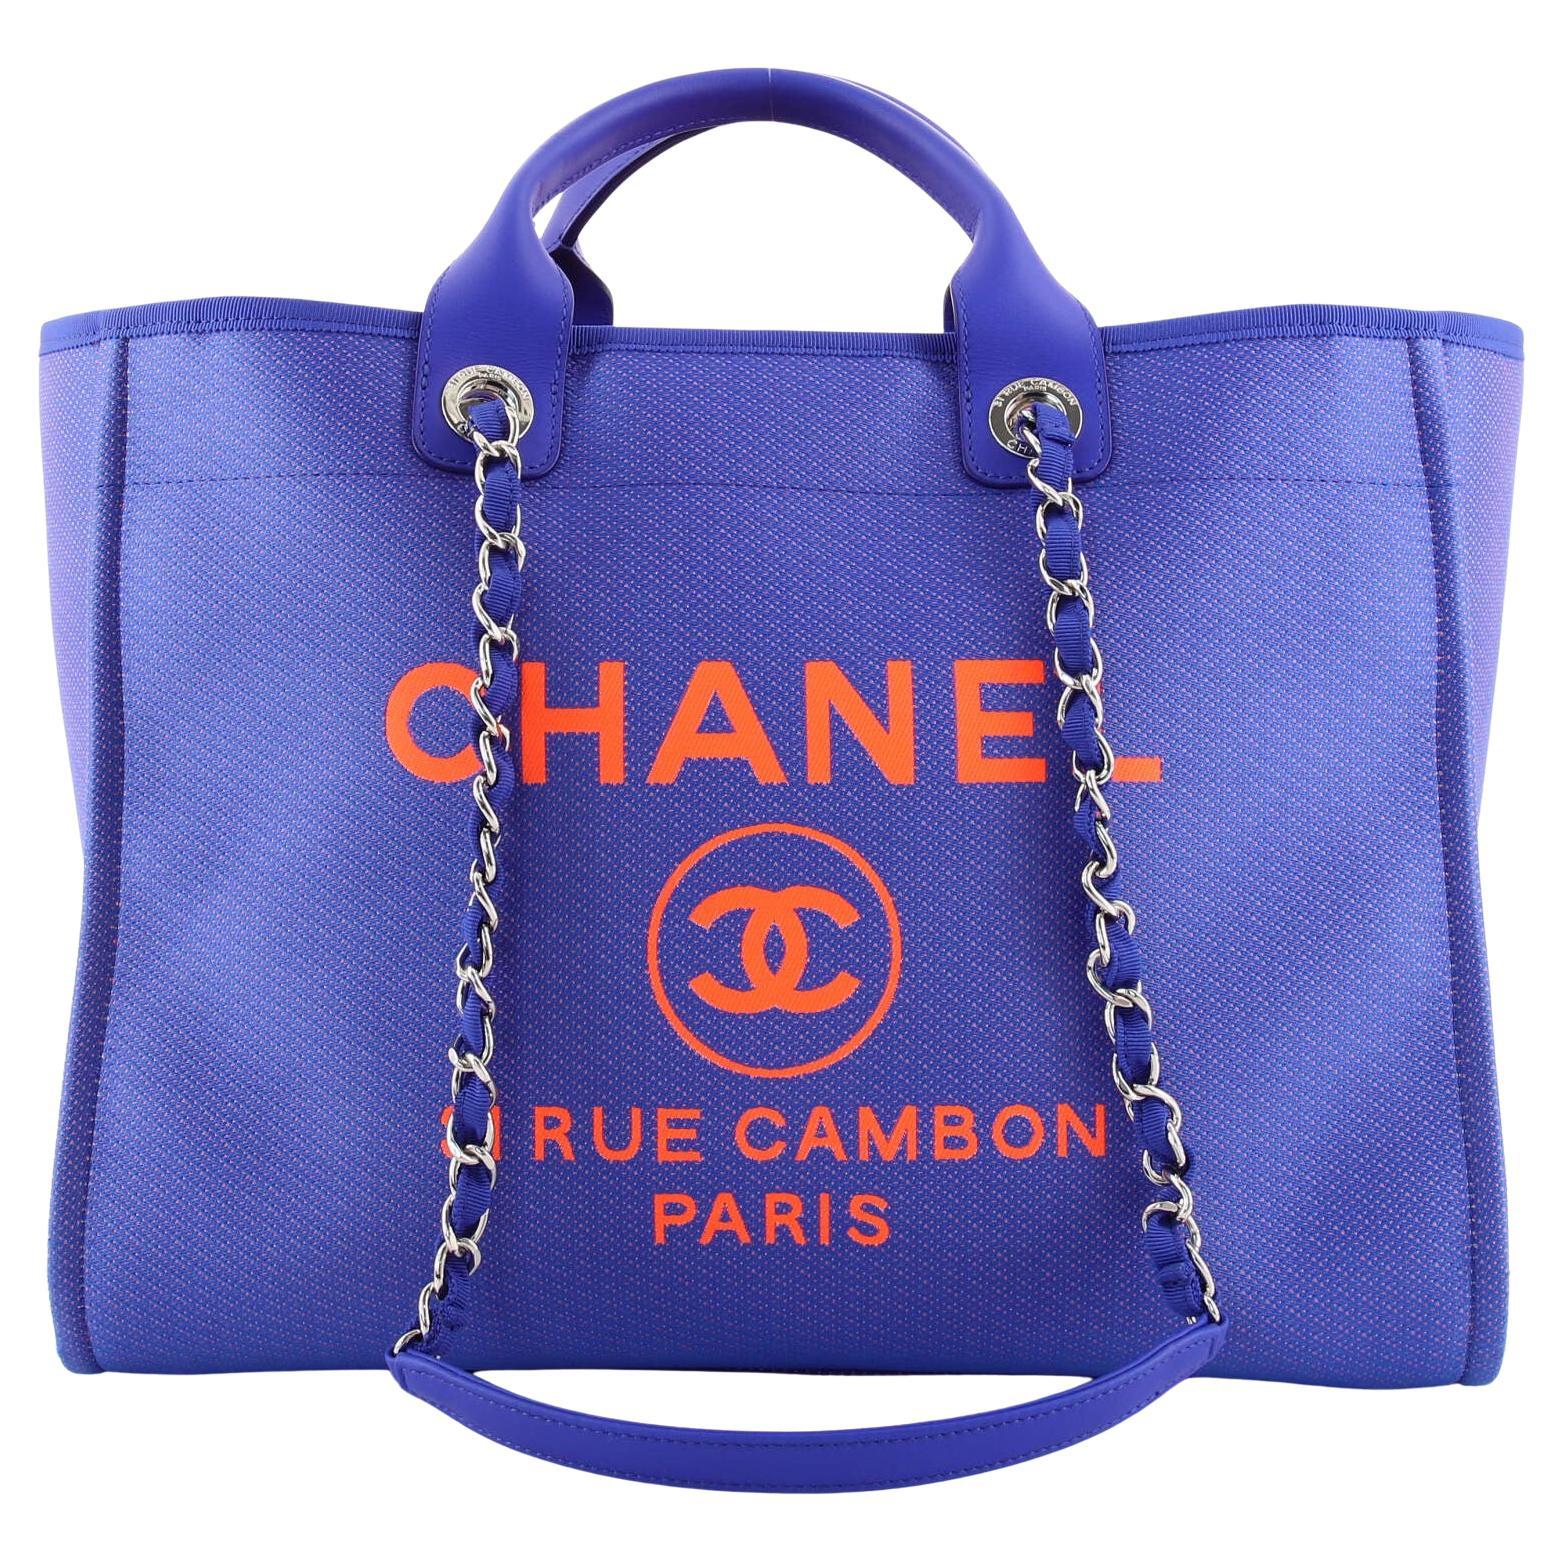 Chanel Deauville Medium Tote Bag - Couture USA